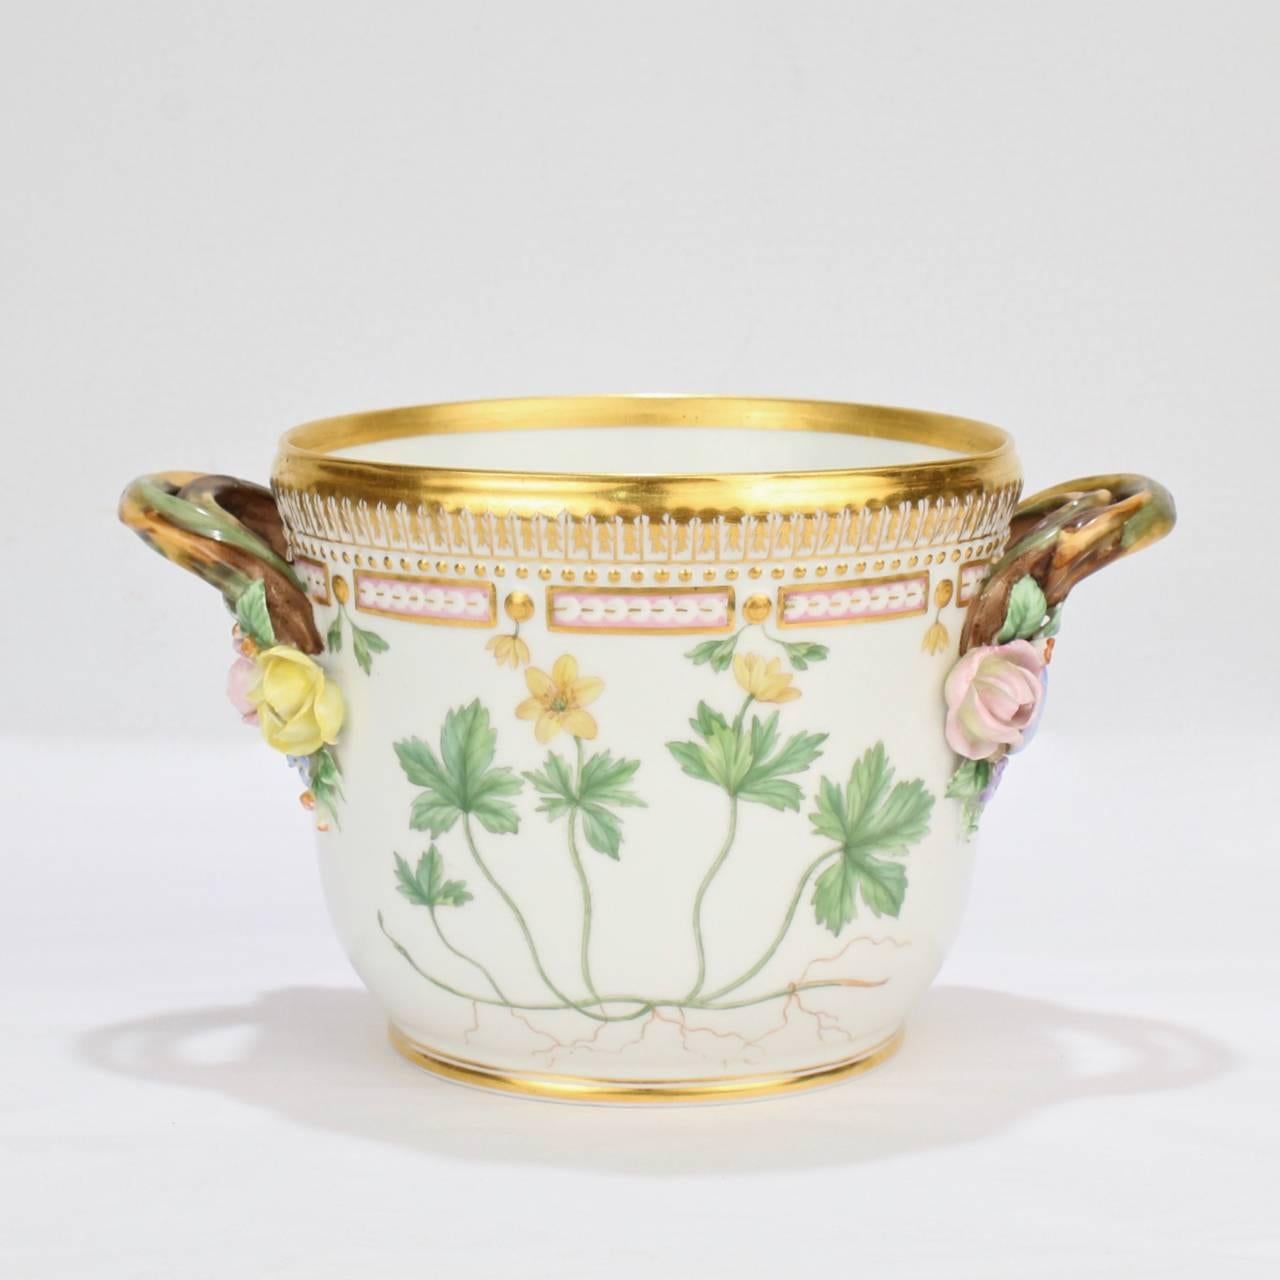 A fine, vintage Royal Copenhagen Flora Danica round wine cooler or cachepot. 

With typical floral decoration being identified as the anemones and violets - Anenome Richardsoni Haak. and Viola Hirta L.

Base bears the Royal Copenhagen factory